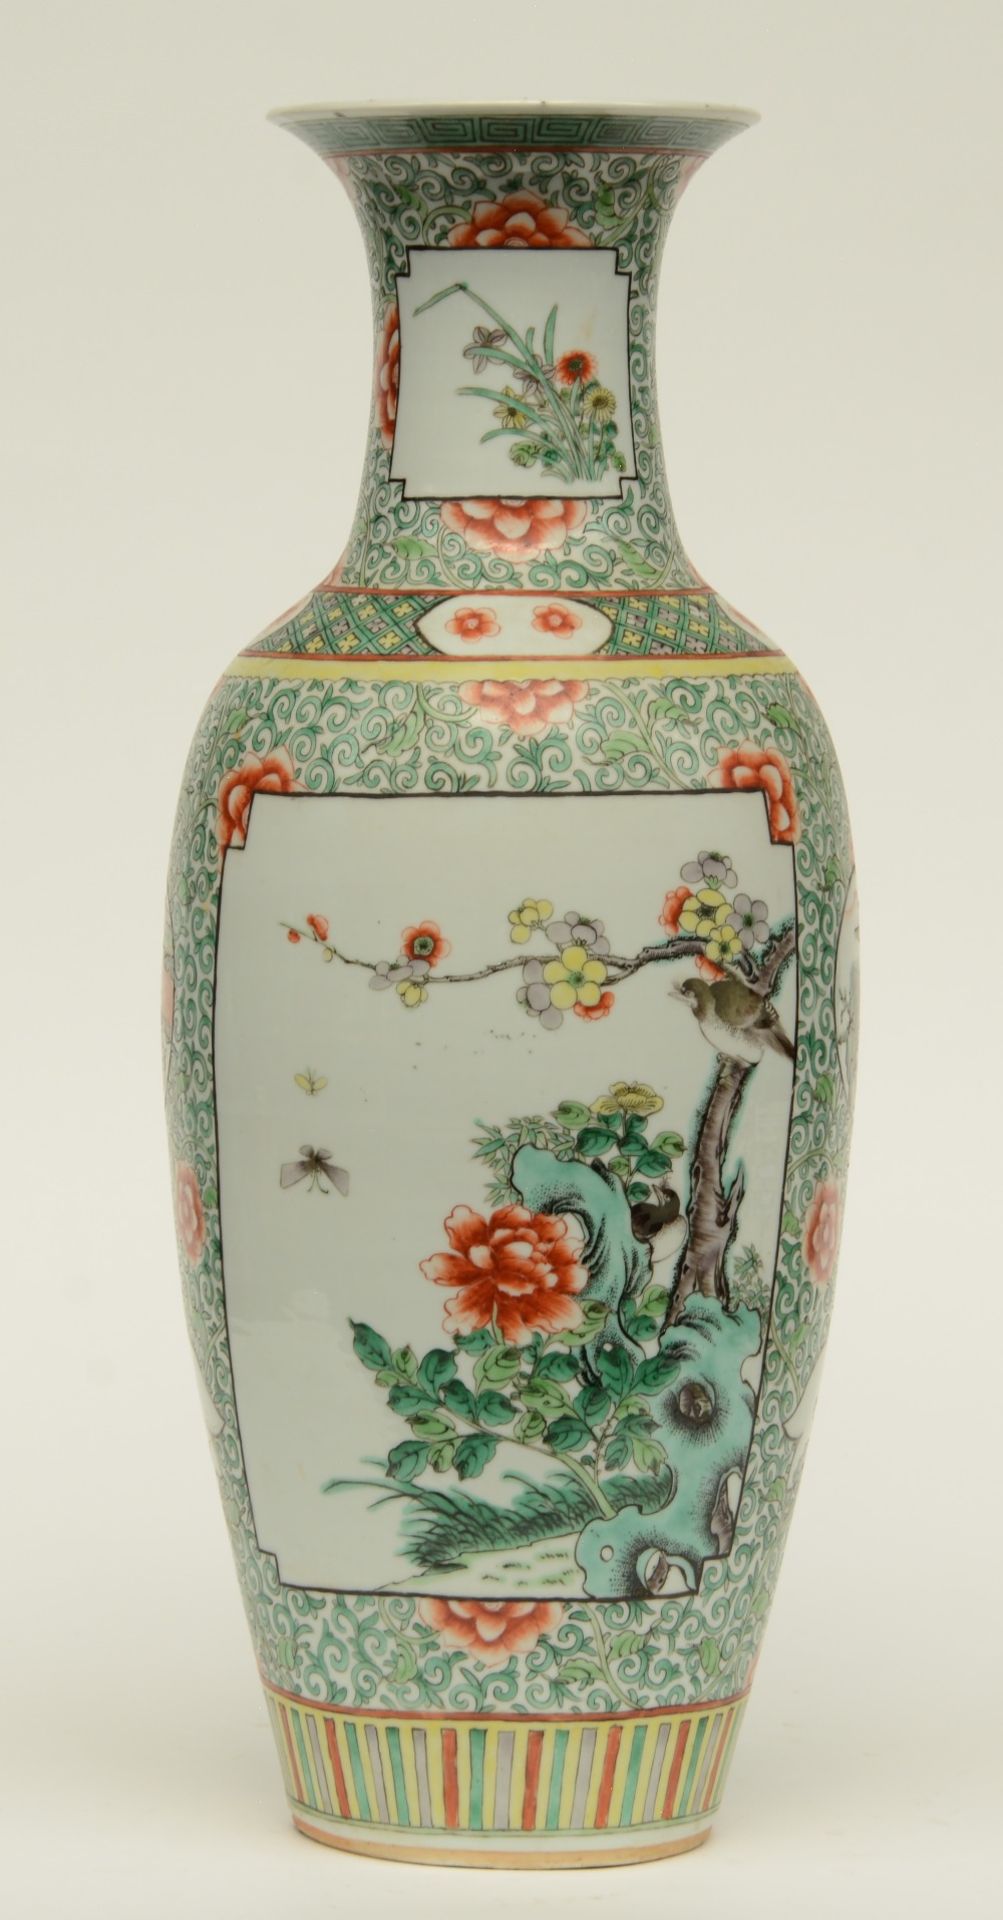 A Chinese polychrome vase decorated with flower branches, landscapes and floral motifs, H 60 cm